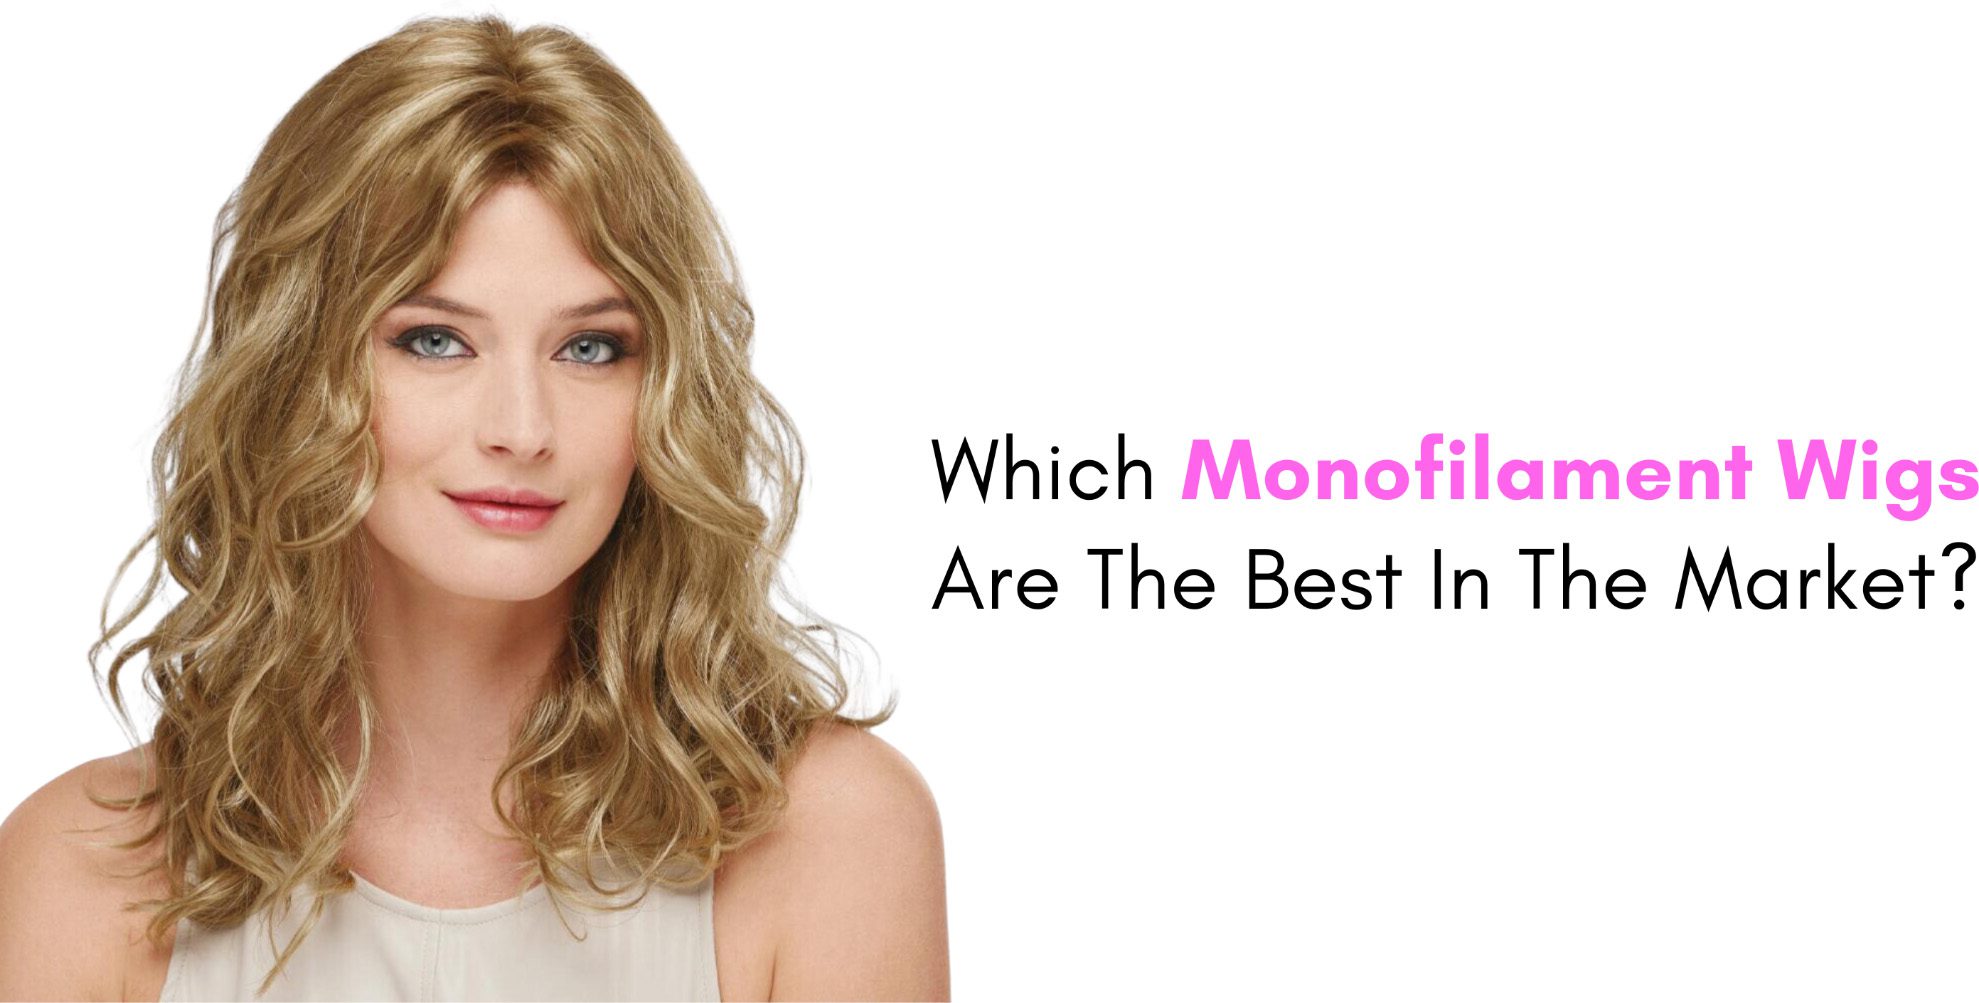 Which Monofilament Wigs Are The Best In The Market?